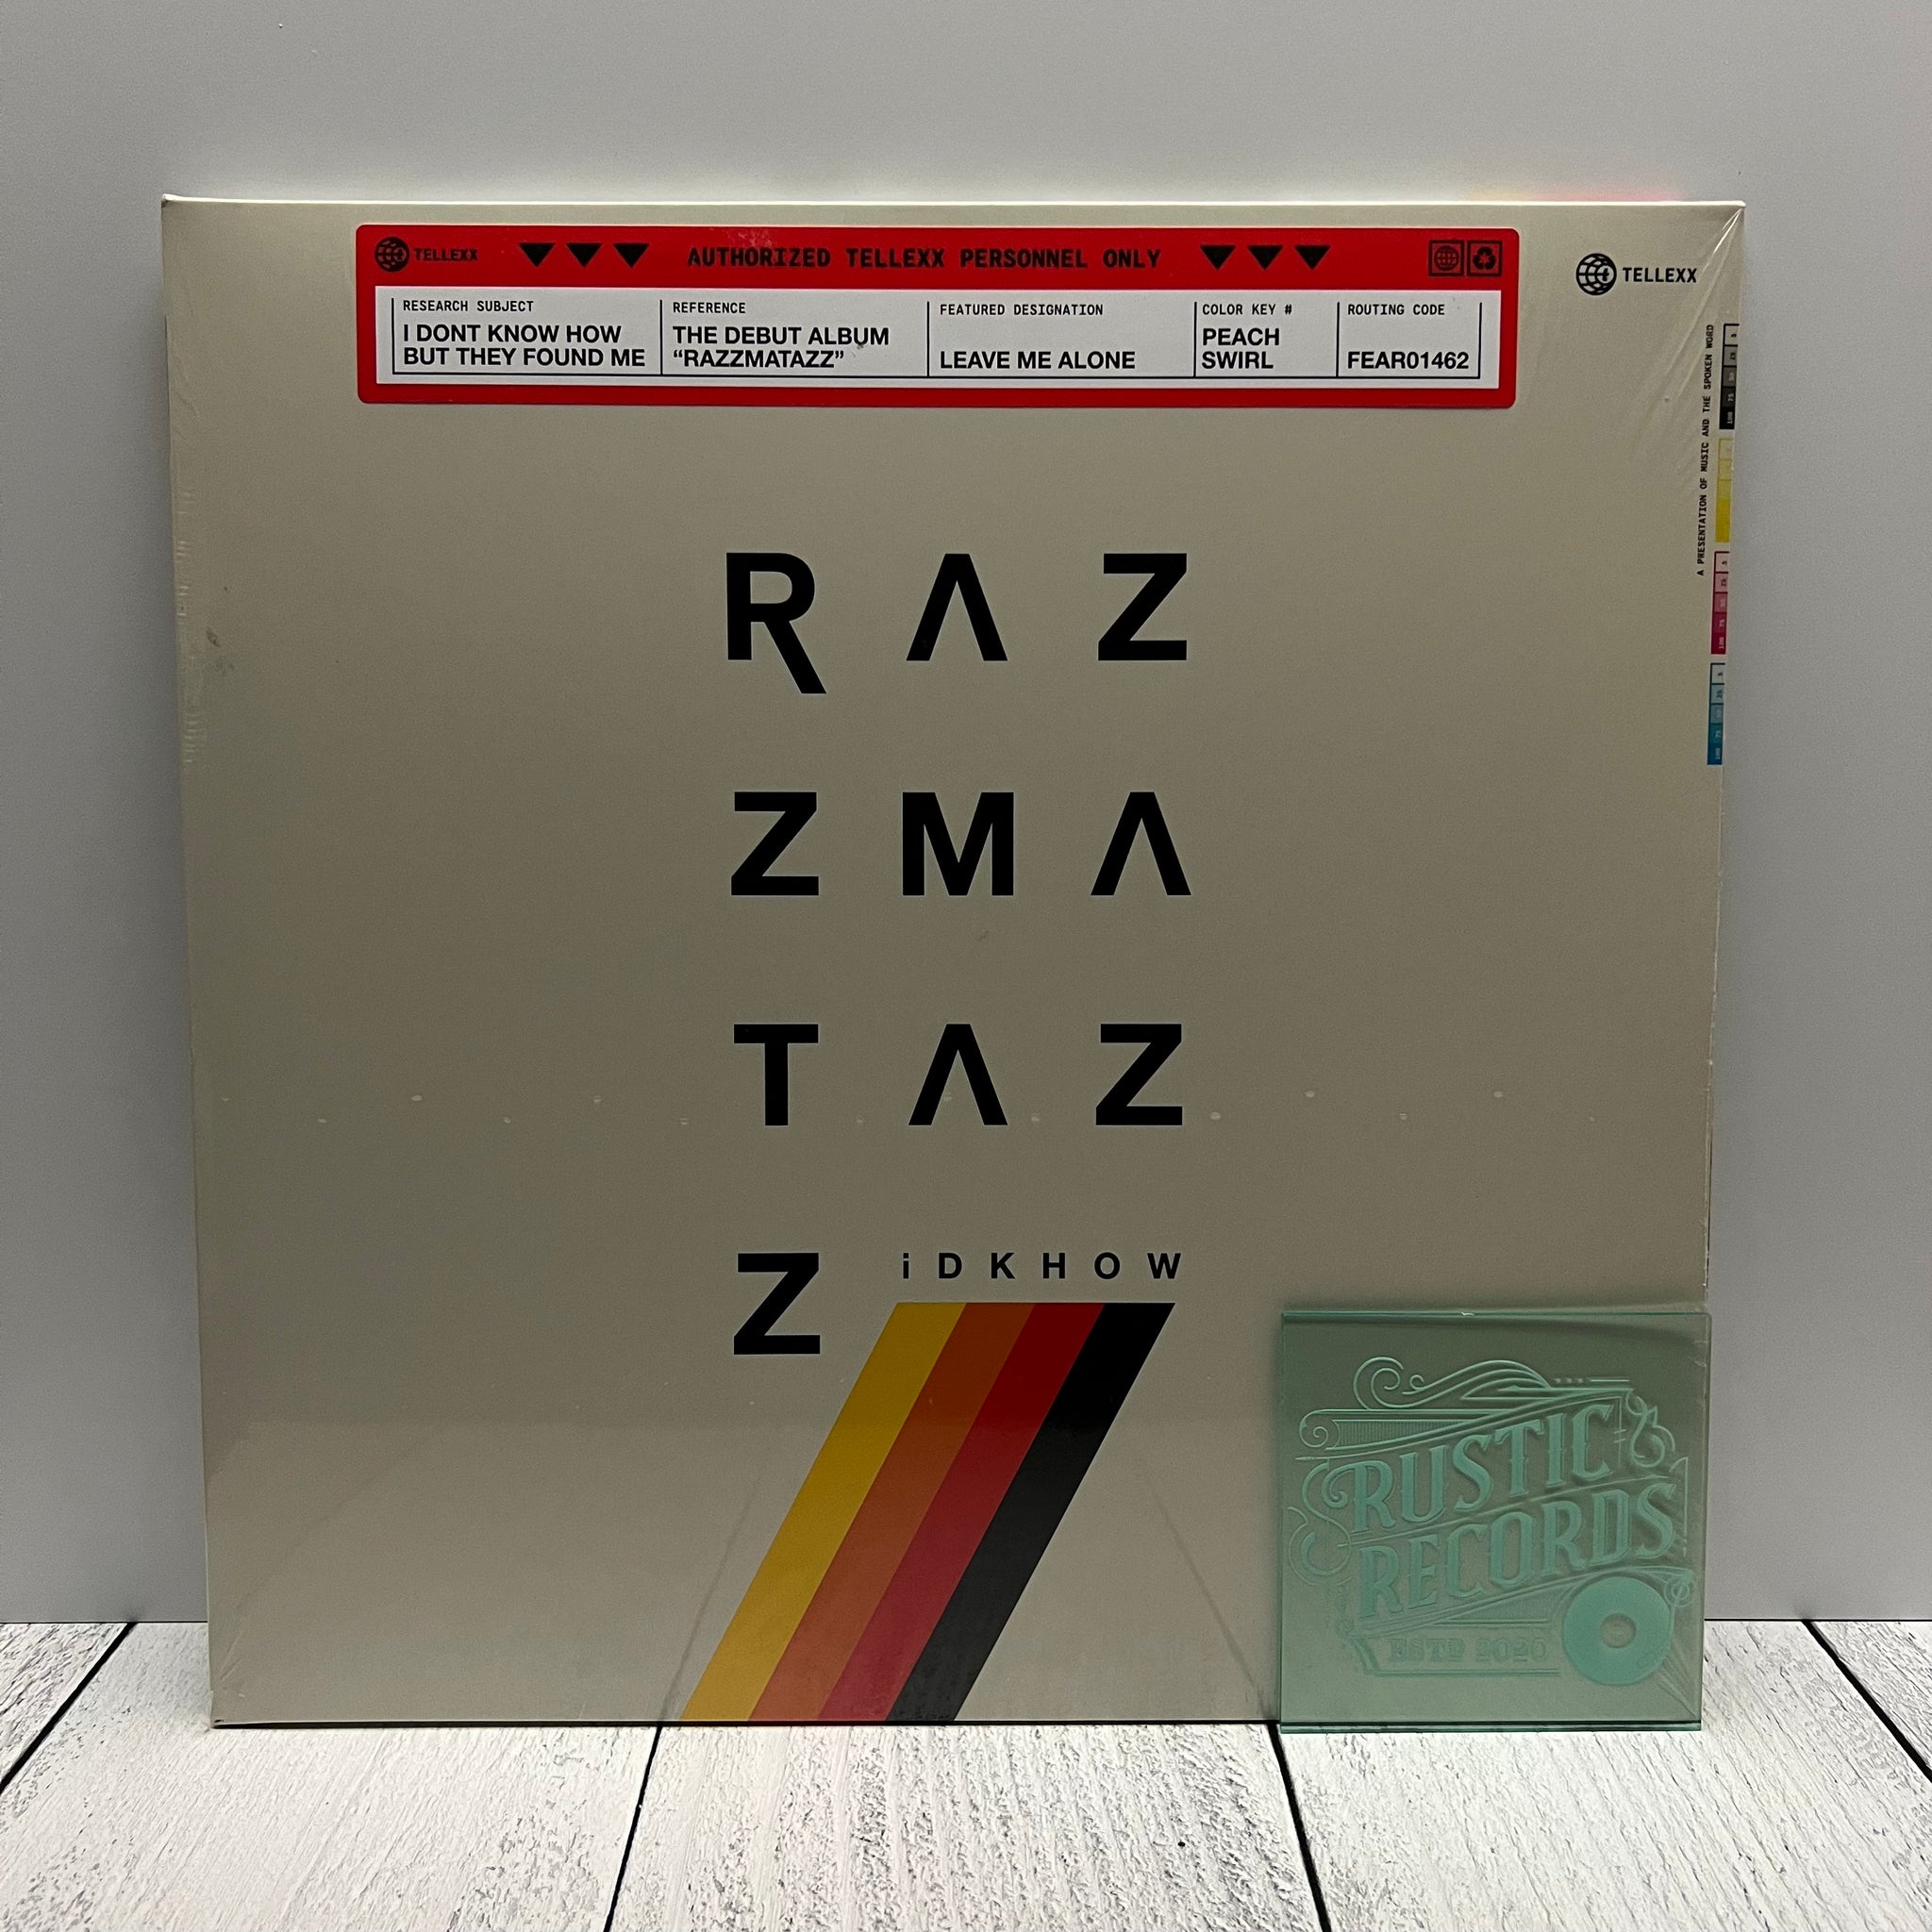 Razzmatazz - I Don't Know How But They Found Me (Indie Exclusive Peach Vinyl)